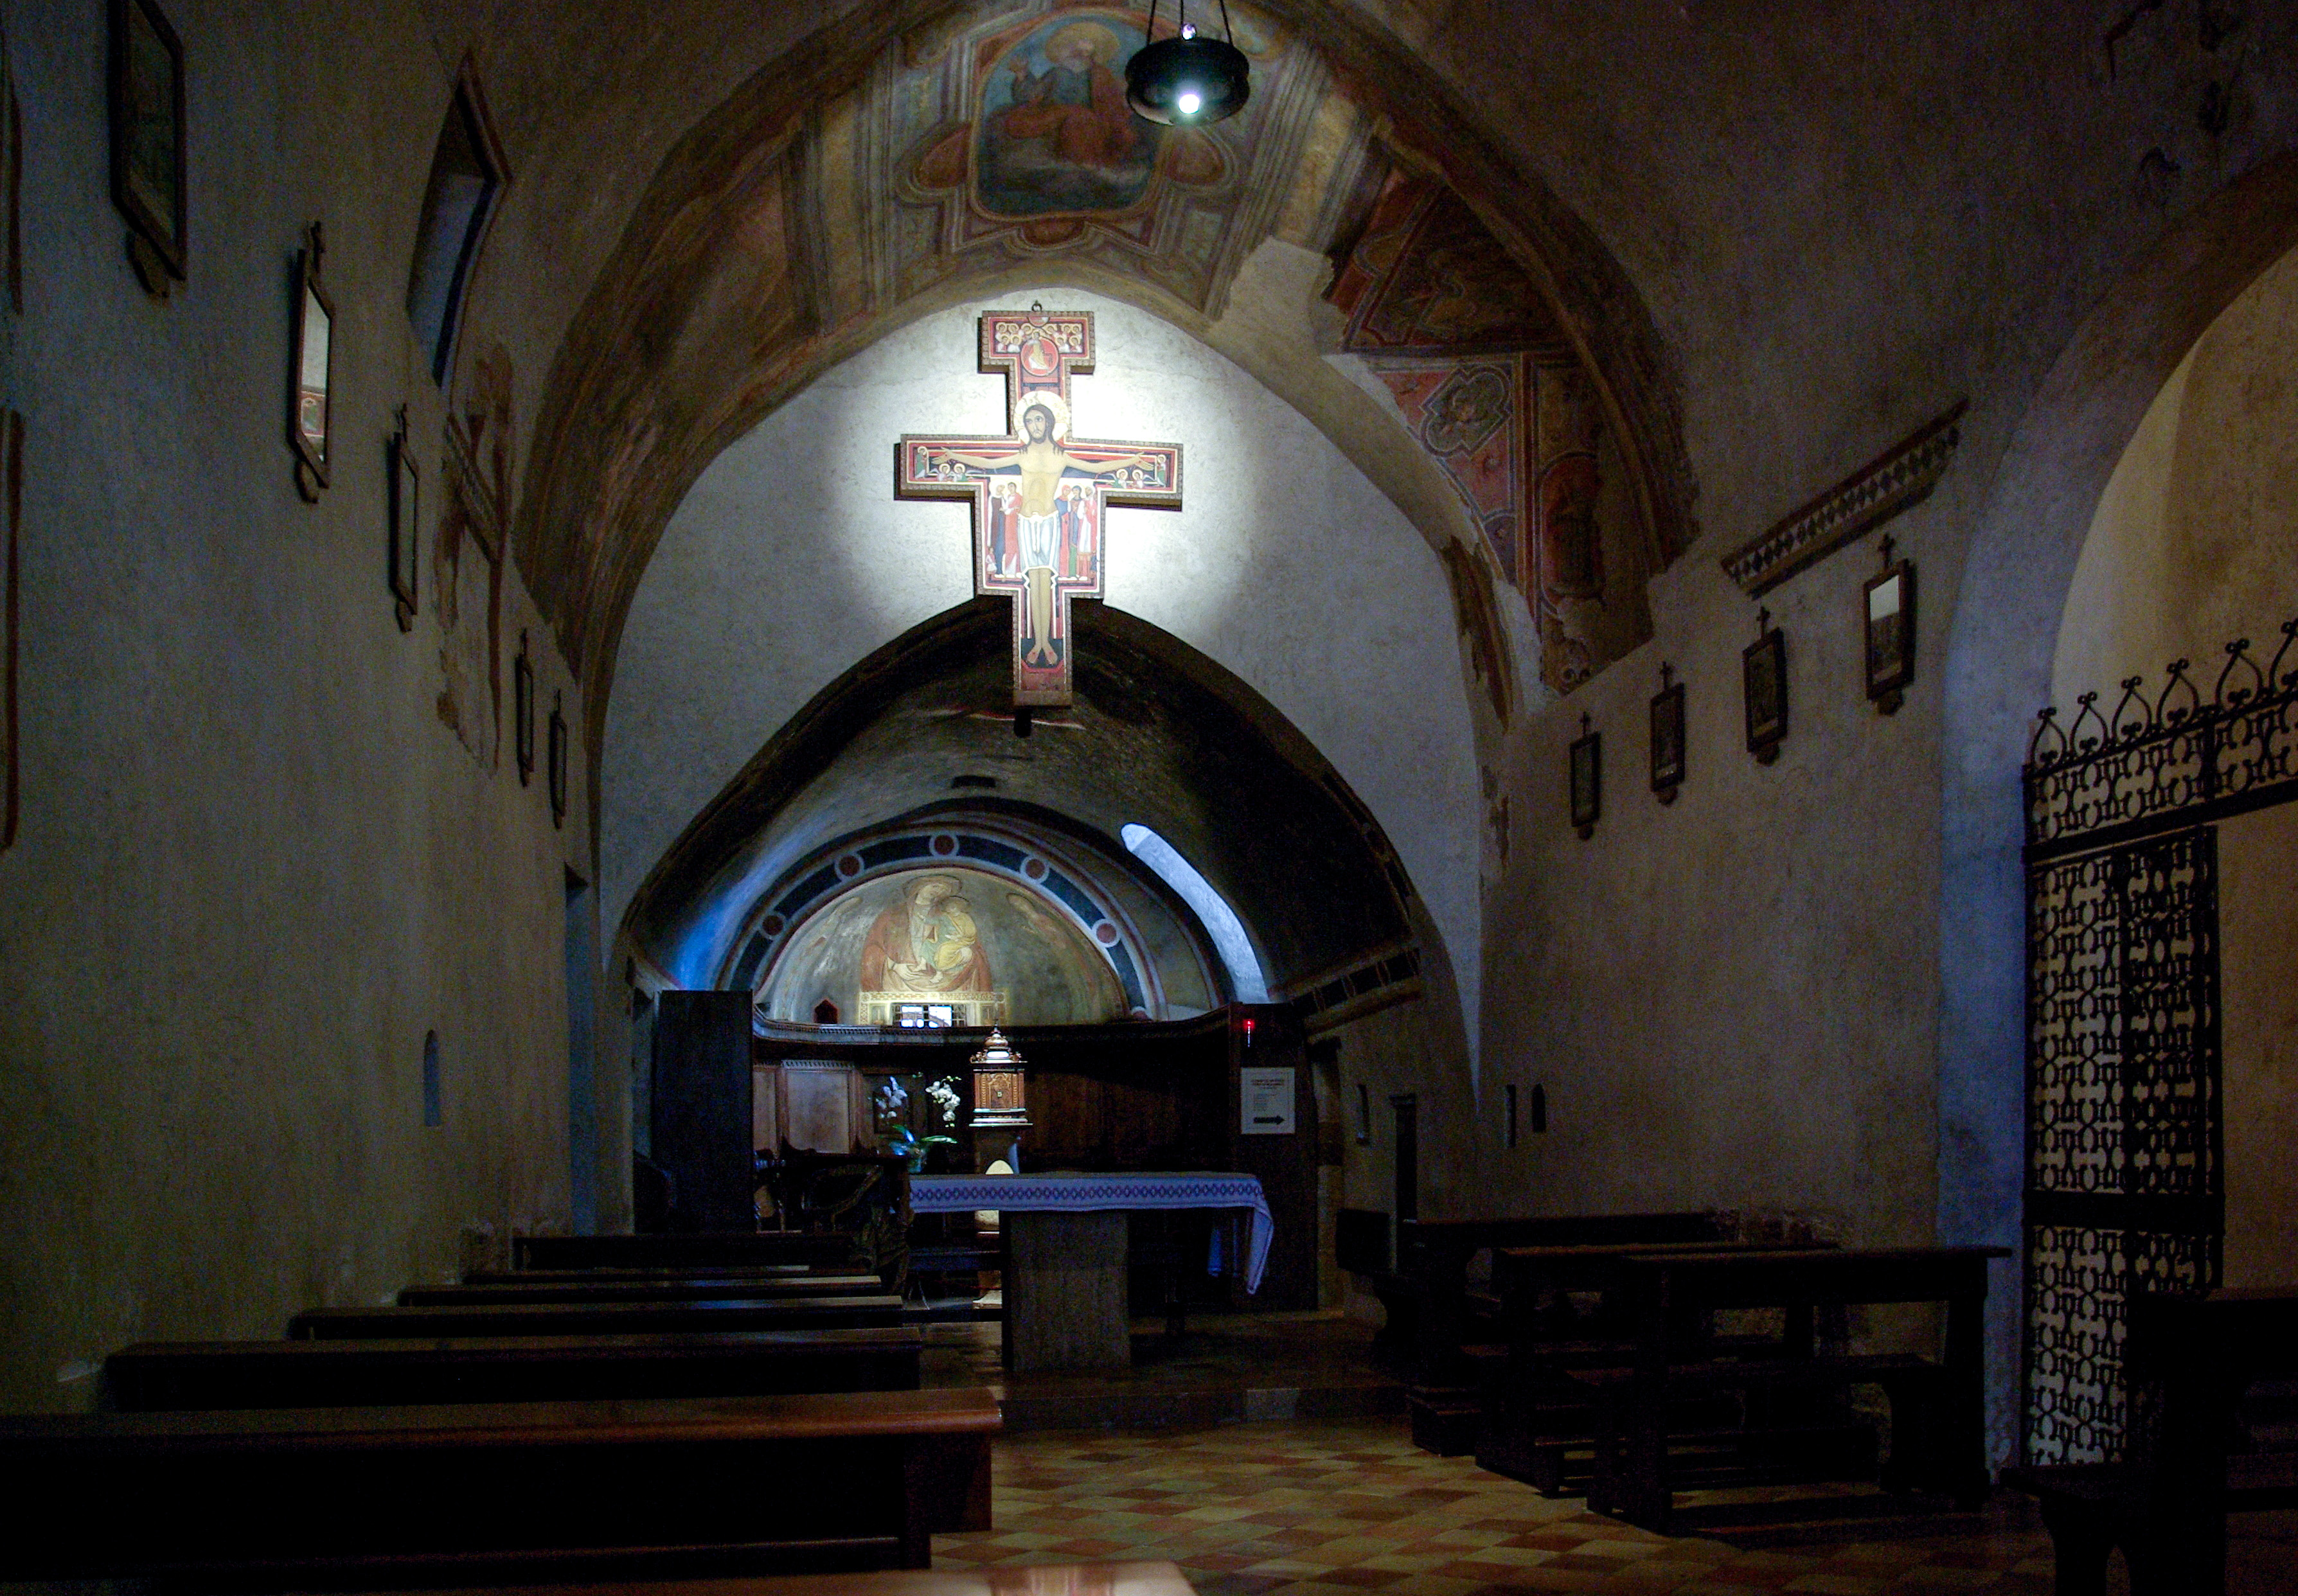 Assisi, San Damiano - Berthold Werner, 8 March 2009 - Public Domain